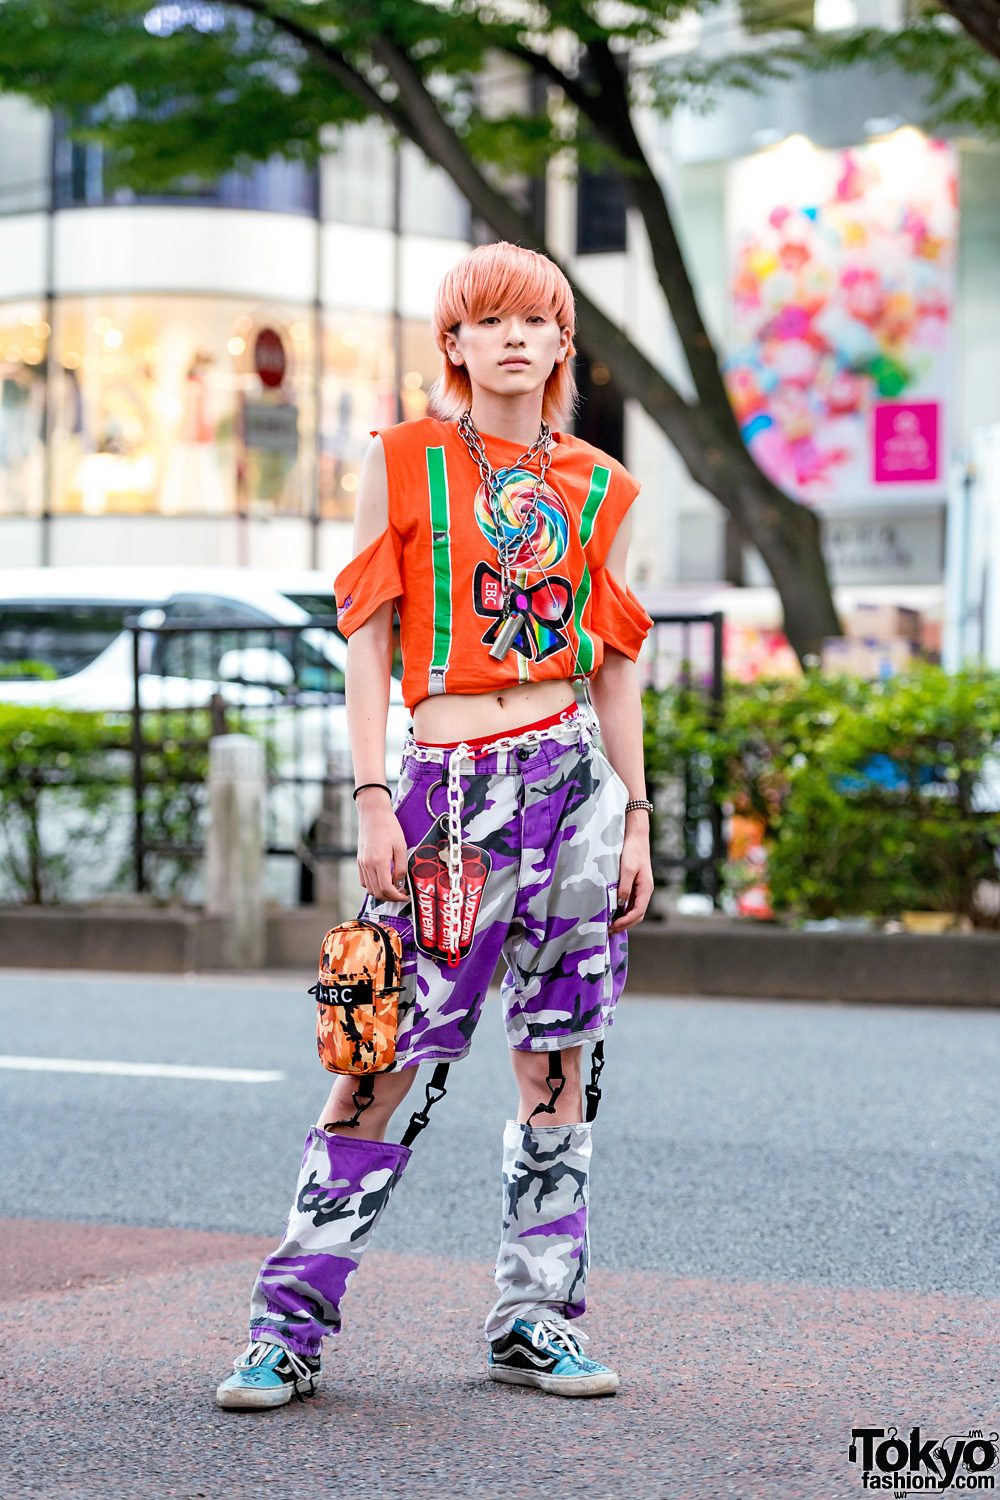 Harajuku Cut Out Remake Street Style w/ Cropped Shirt, Supreme, Camo Pants,  Vans Sneakers & M+RC Noir Camouflage Pouch – Tokyo Fashion